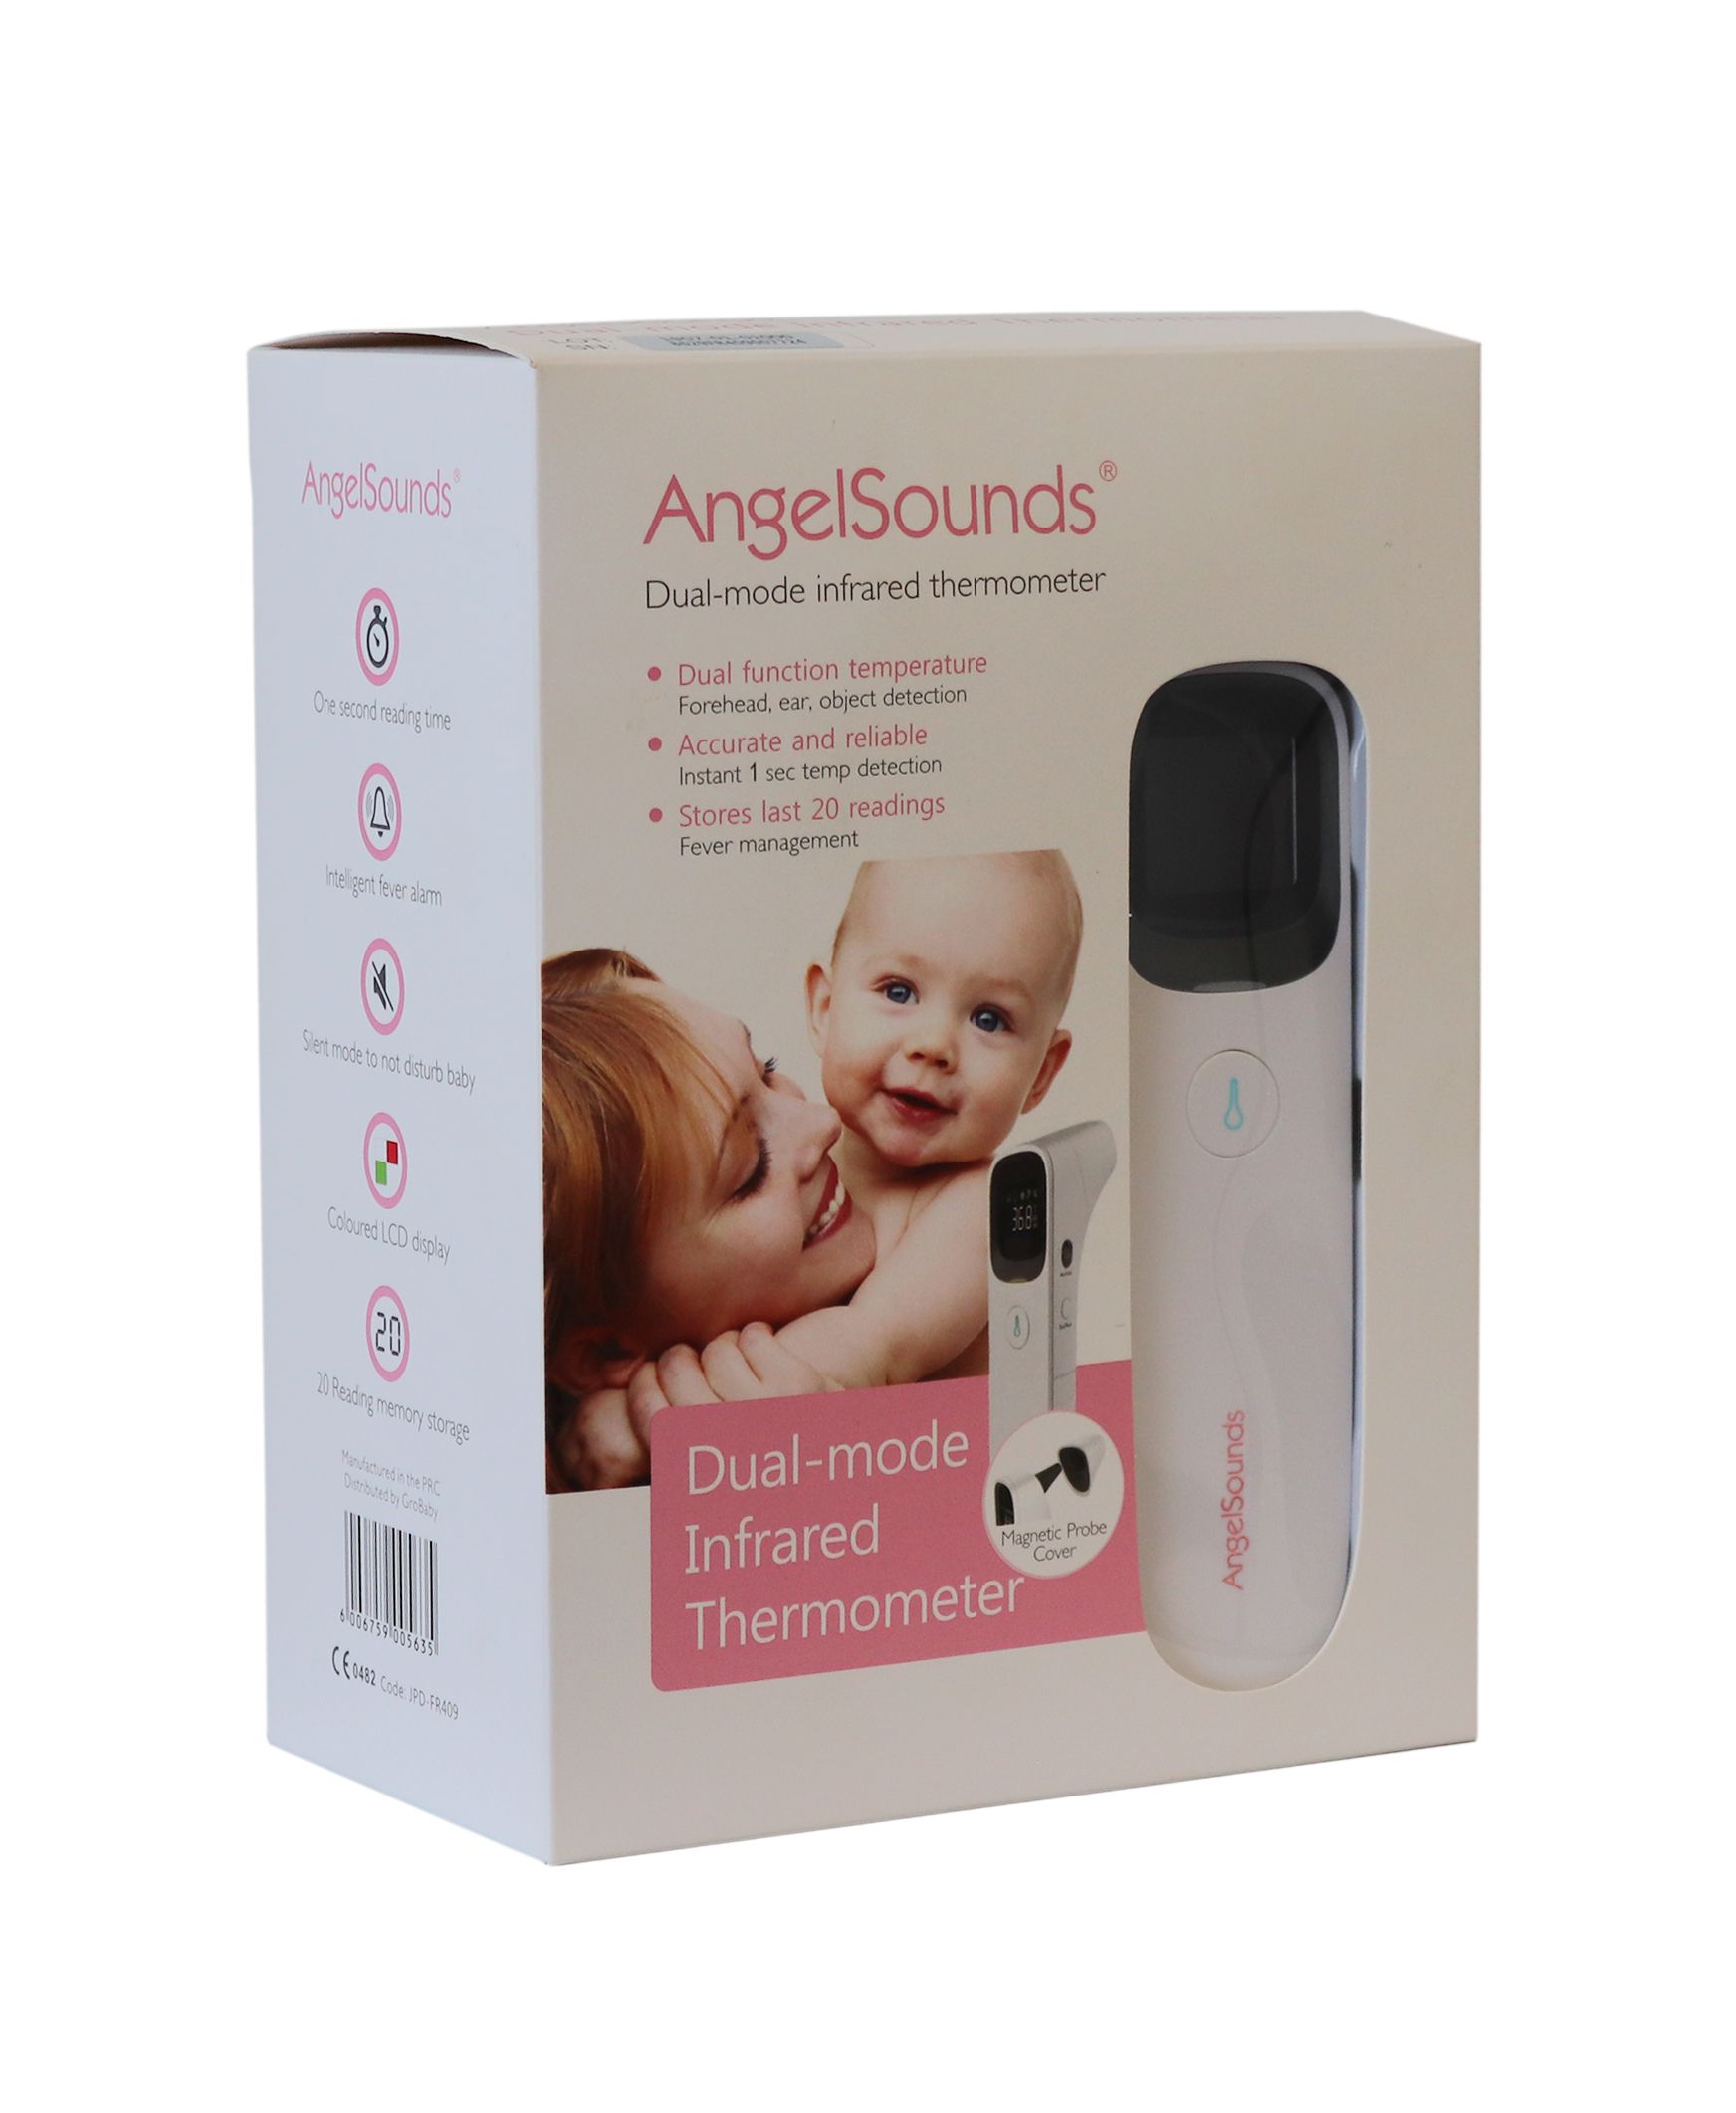 ANGEL SOUNDS – DUAL-MODE INFRARED THERMOMETER